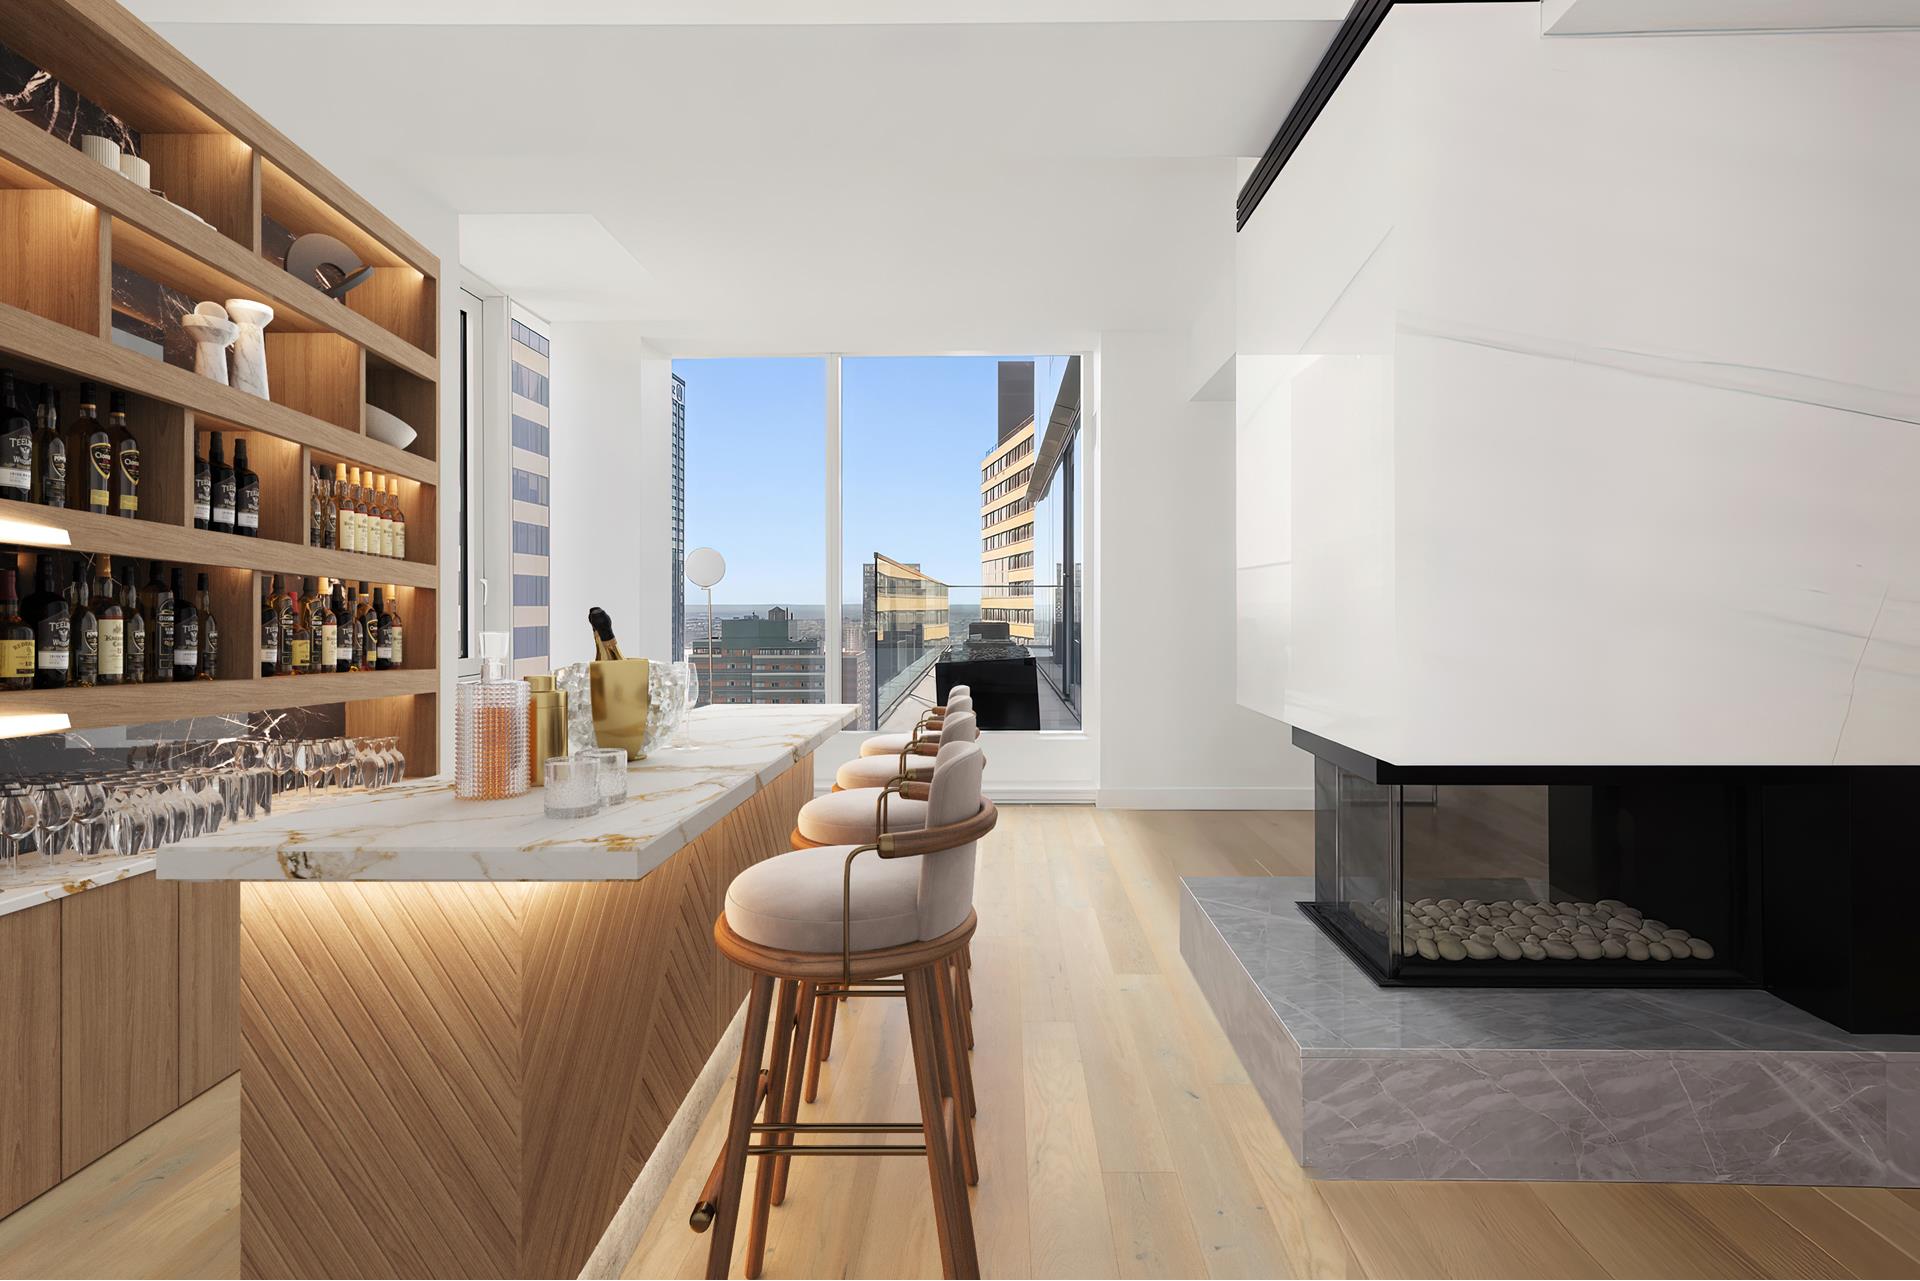 135 West 52nd Street Ph5, Chelsea And Clinton, Downtown, NYC - 5 Bedrooms  
4.5 Bathrooms  
9 Rooms - 